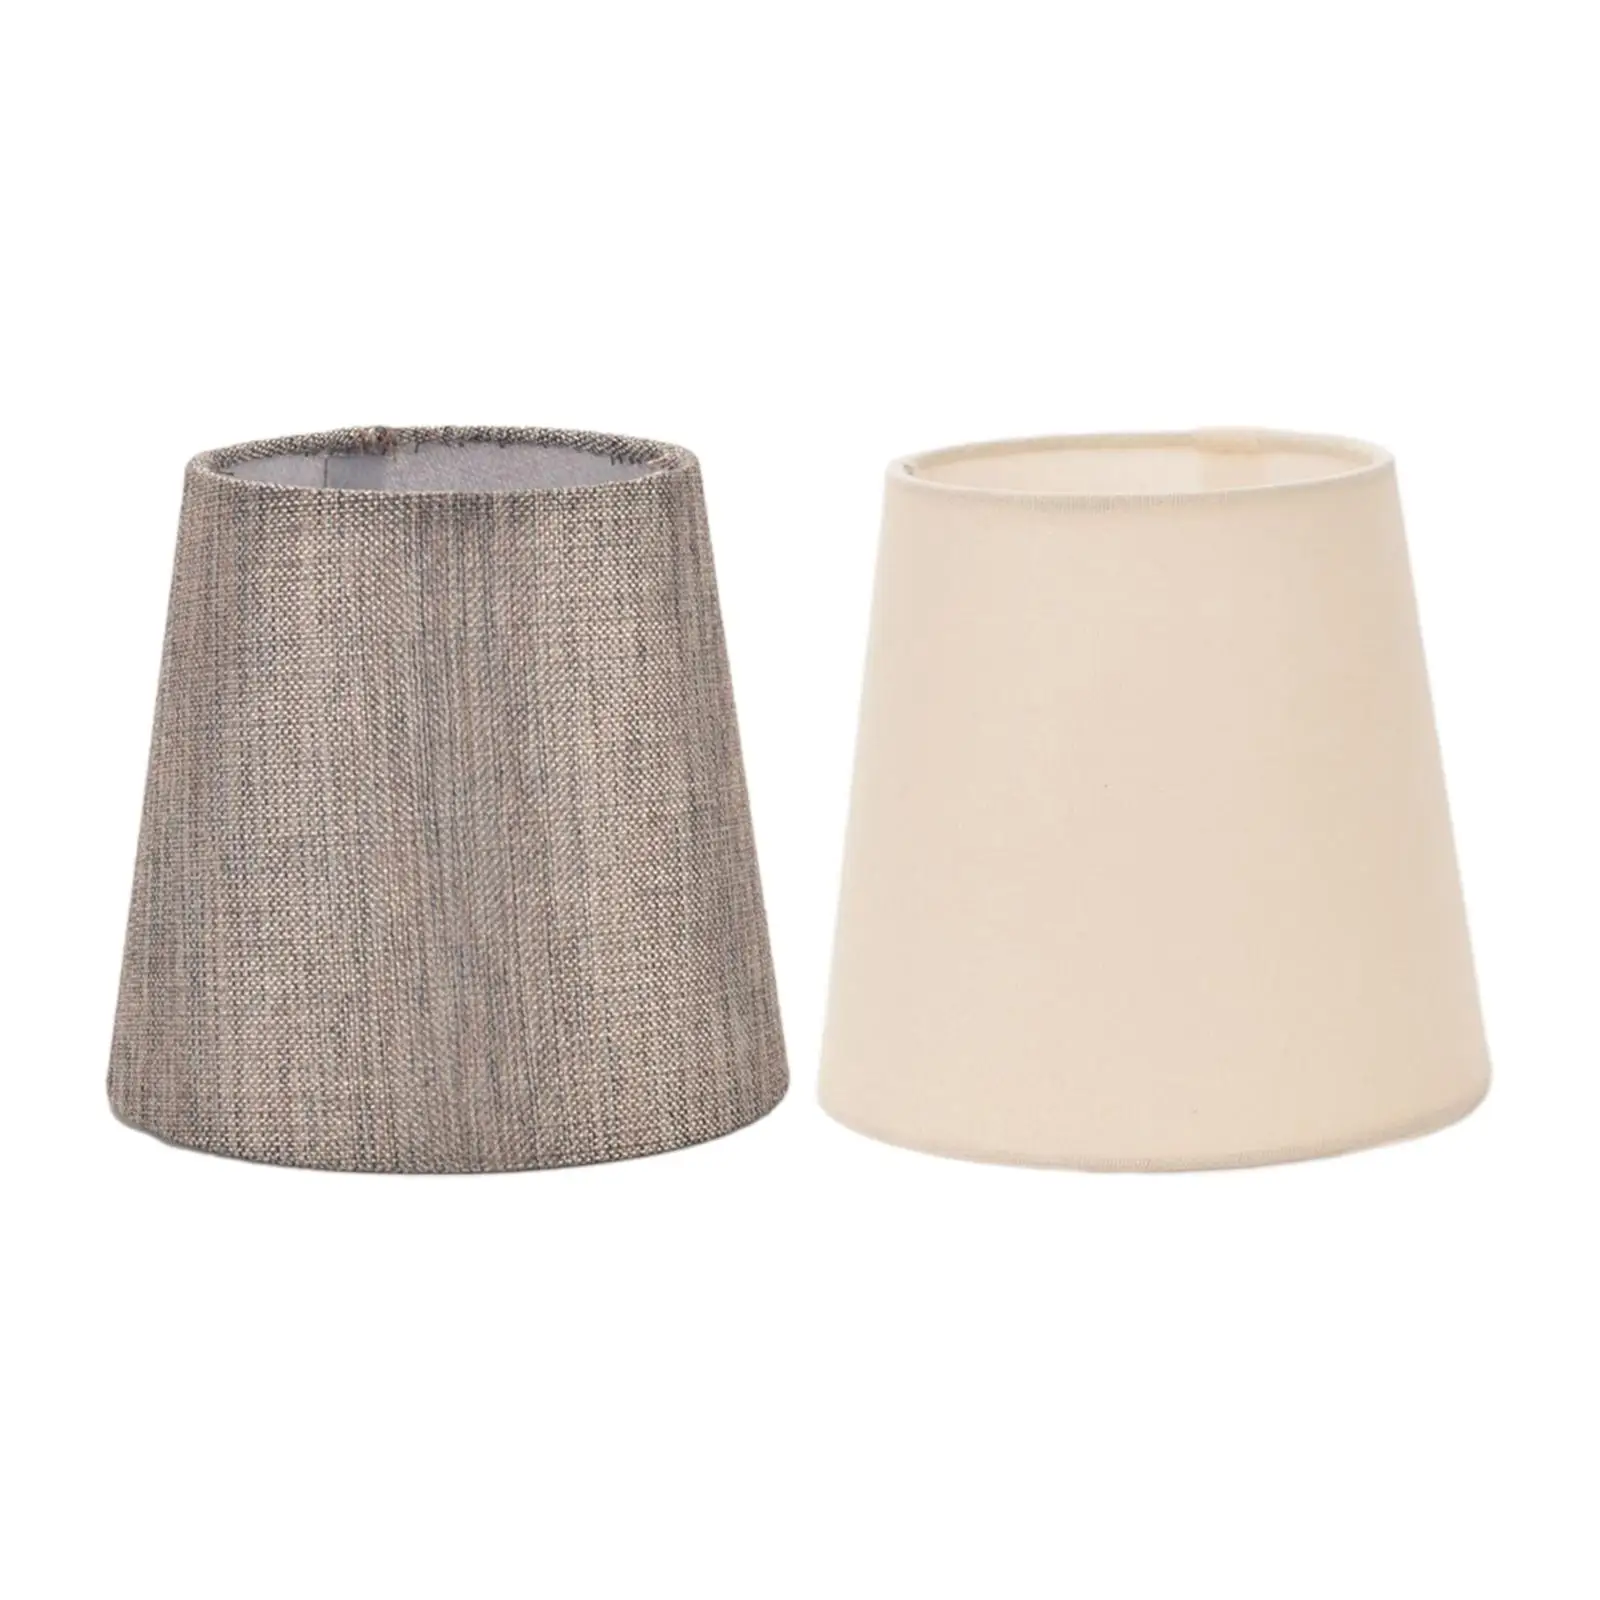 Drum Lamp Shade Table Lampshade for Kitchen Living Room